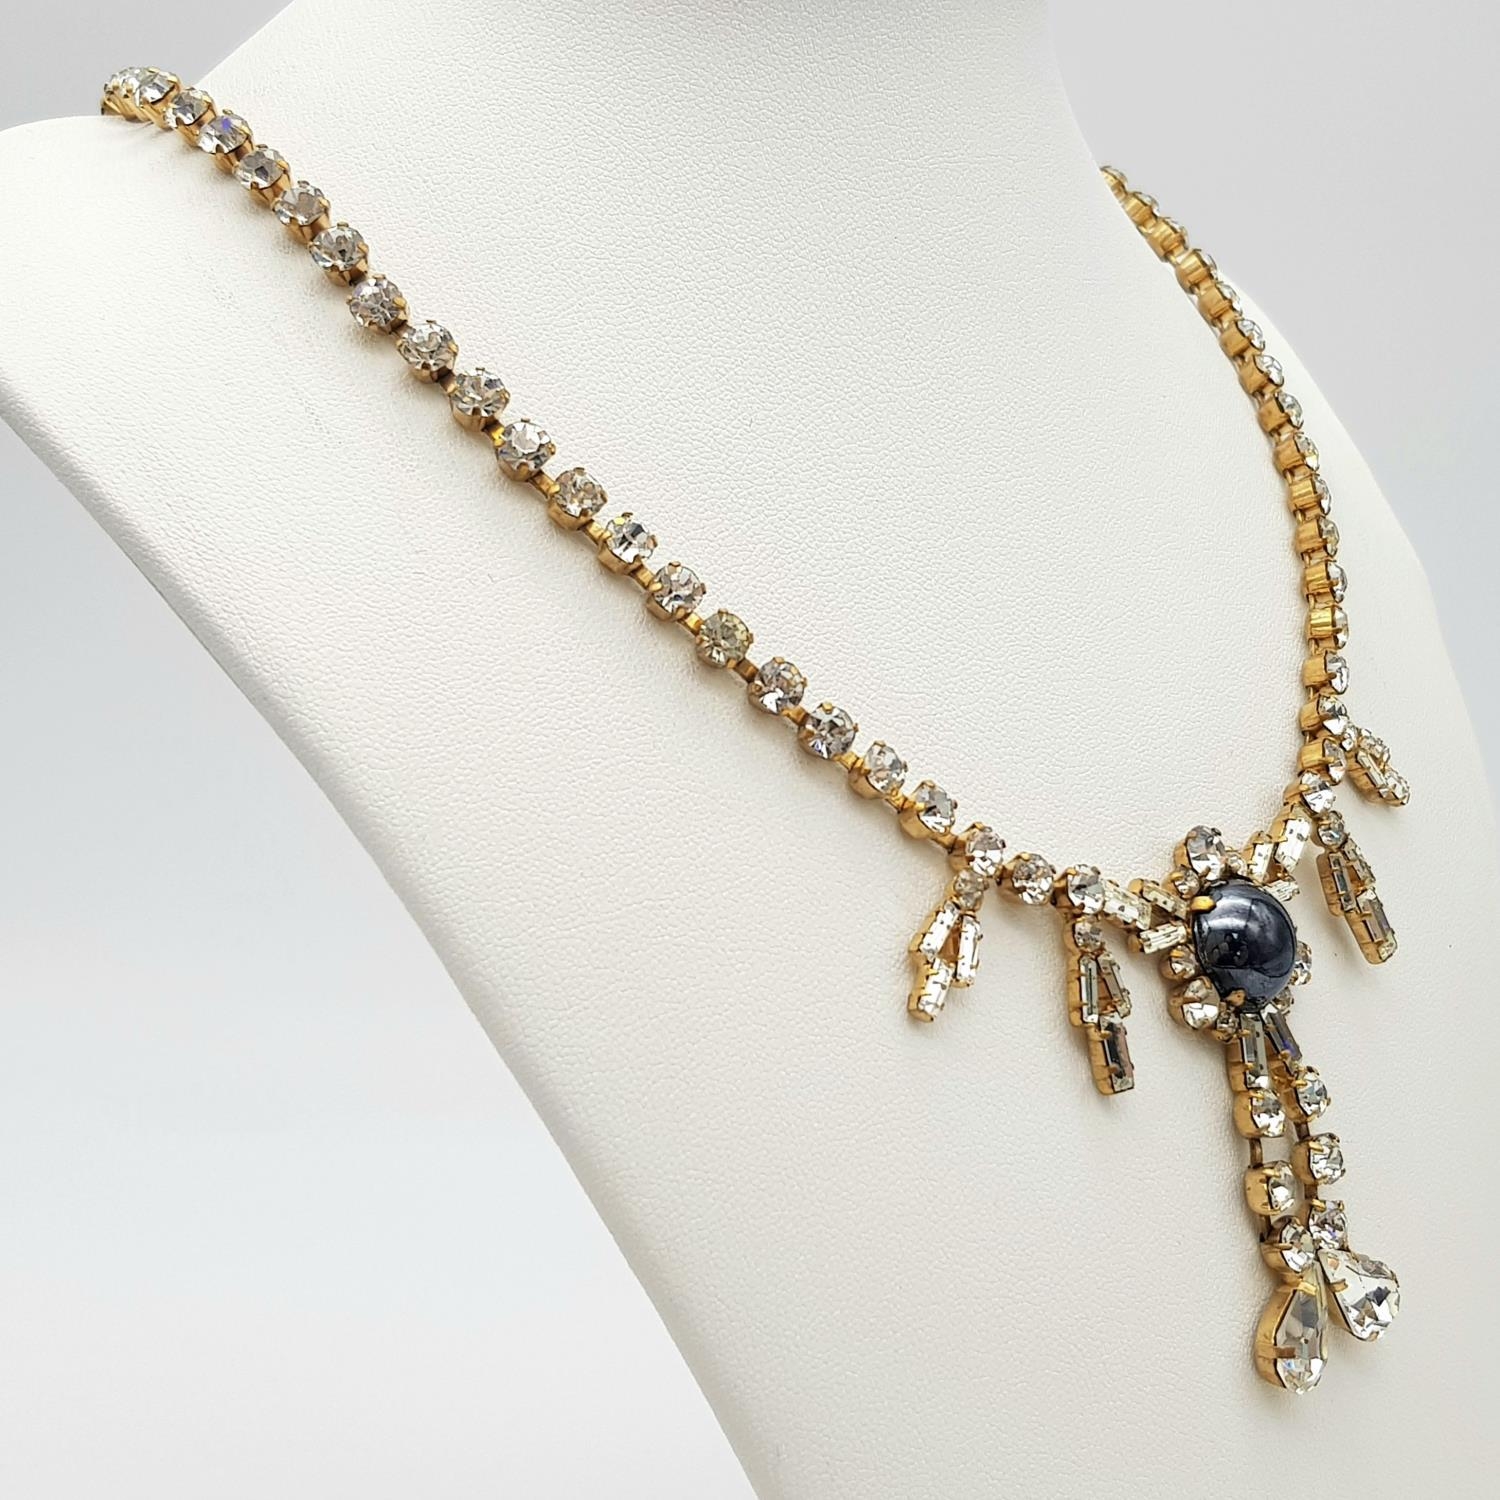 A Very Attractive Vintage Gold Tone Stone Set Cocktail/ Dress Statement Necklace. 45cm Length. - Image 3 of 6